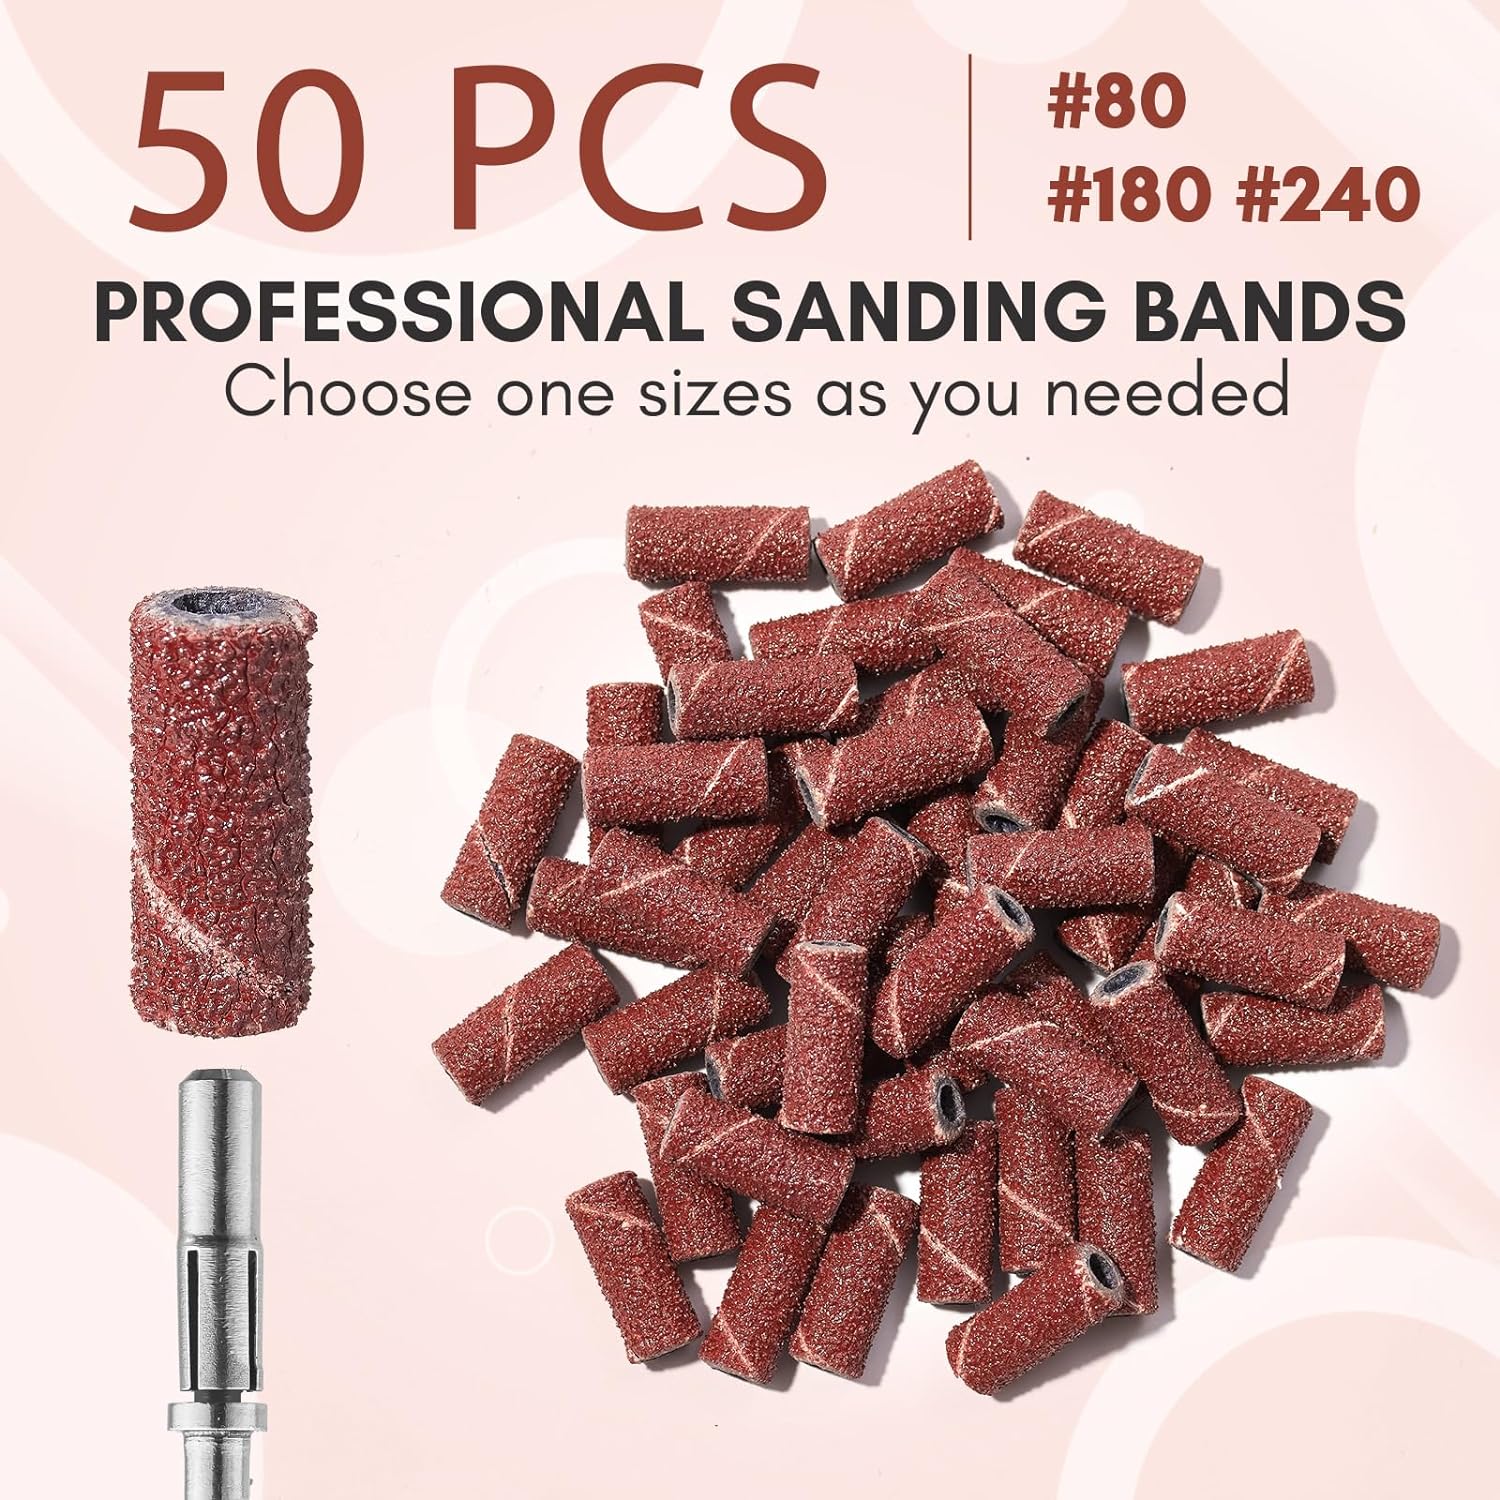 Sanding Bands for Nail Drill with 3.mm Mandrel Bits #80, 50pcs